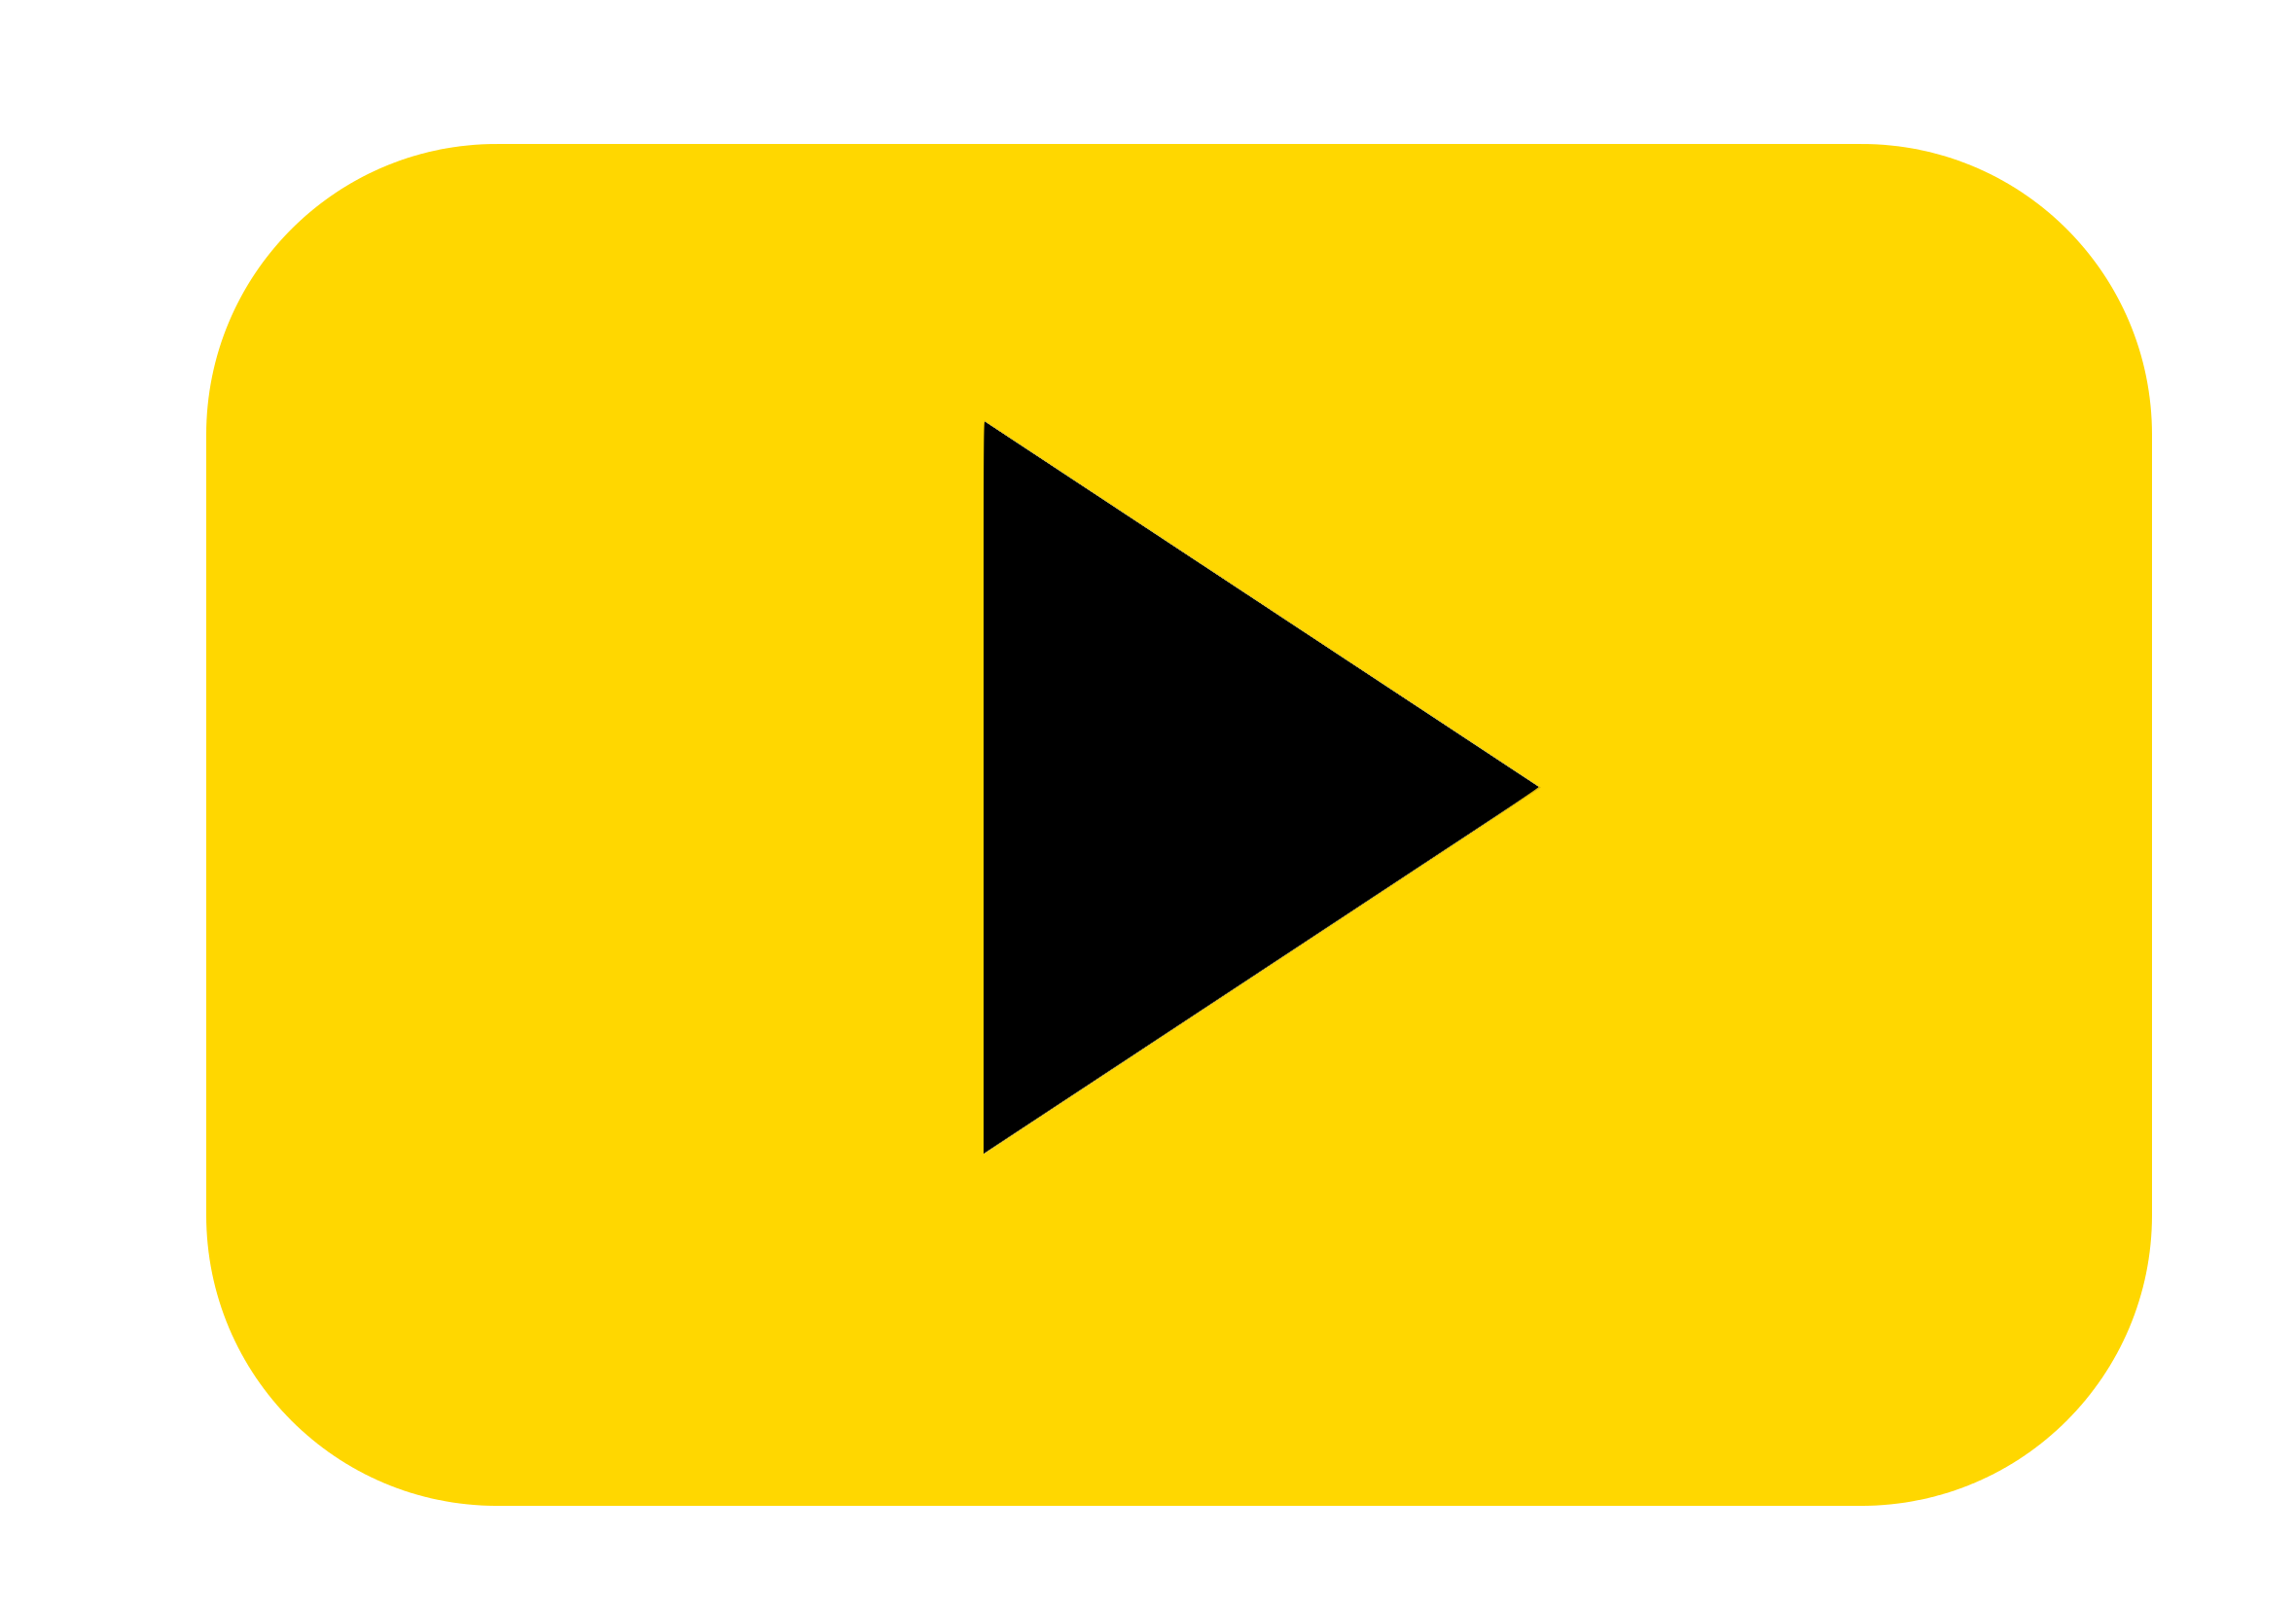 Play Button Black on Yellow PNG in Transparent